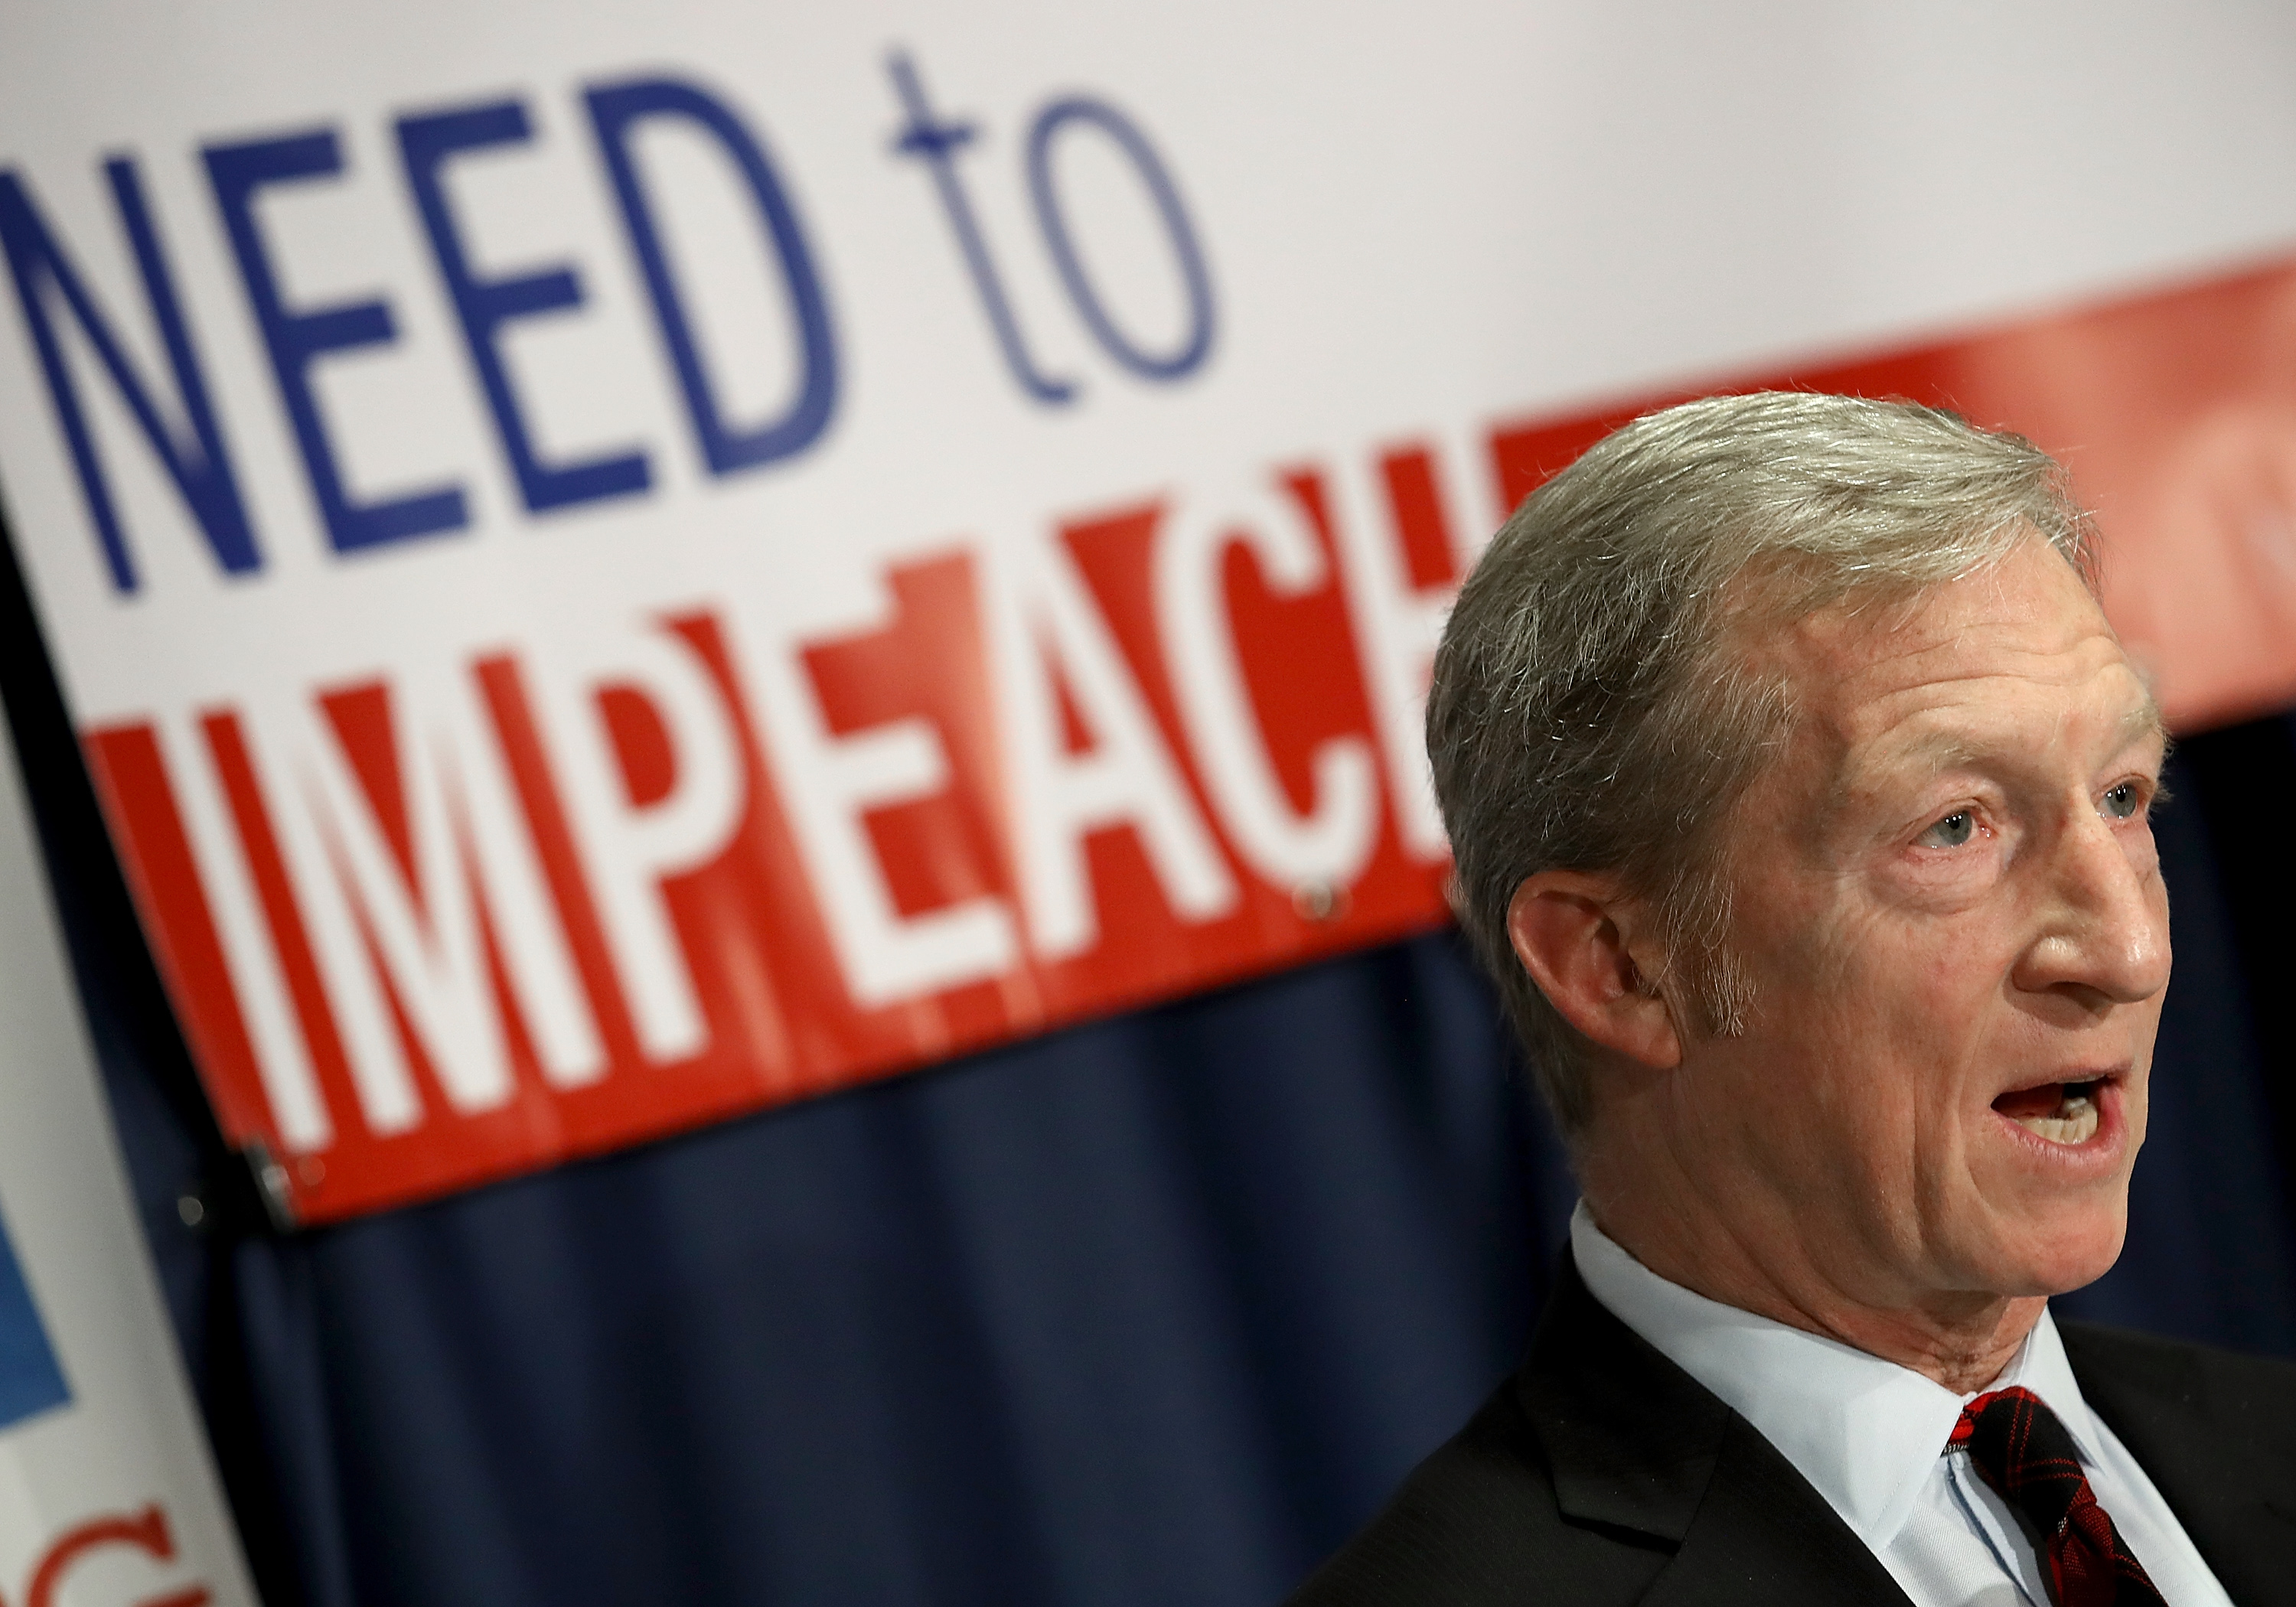 Billionaire hedge fund manager and philanthropist Tom Steyer speaks during a press conference at the National Press Club December 6, 2017 in Washington, DC. Steyer, founder of the "Need To Impeach" initiative, presented legal grounds calling for the impeachment investigation of U.S. President Donald Trump during the press conference. (Win McNamee—Getty Images)